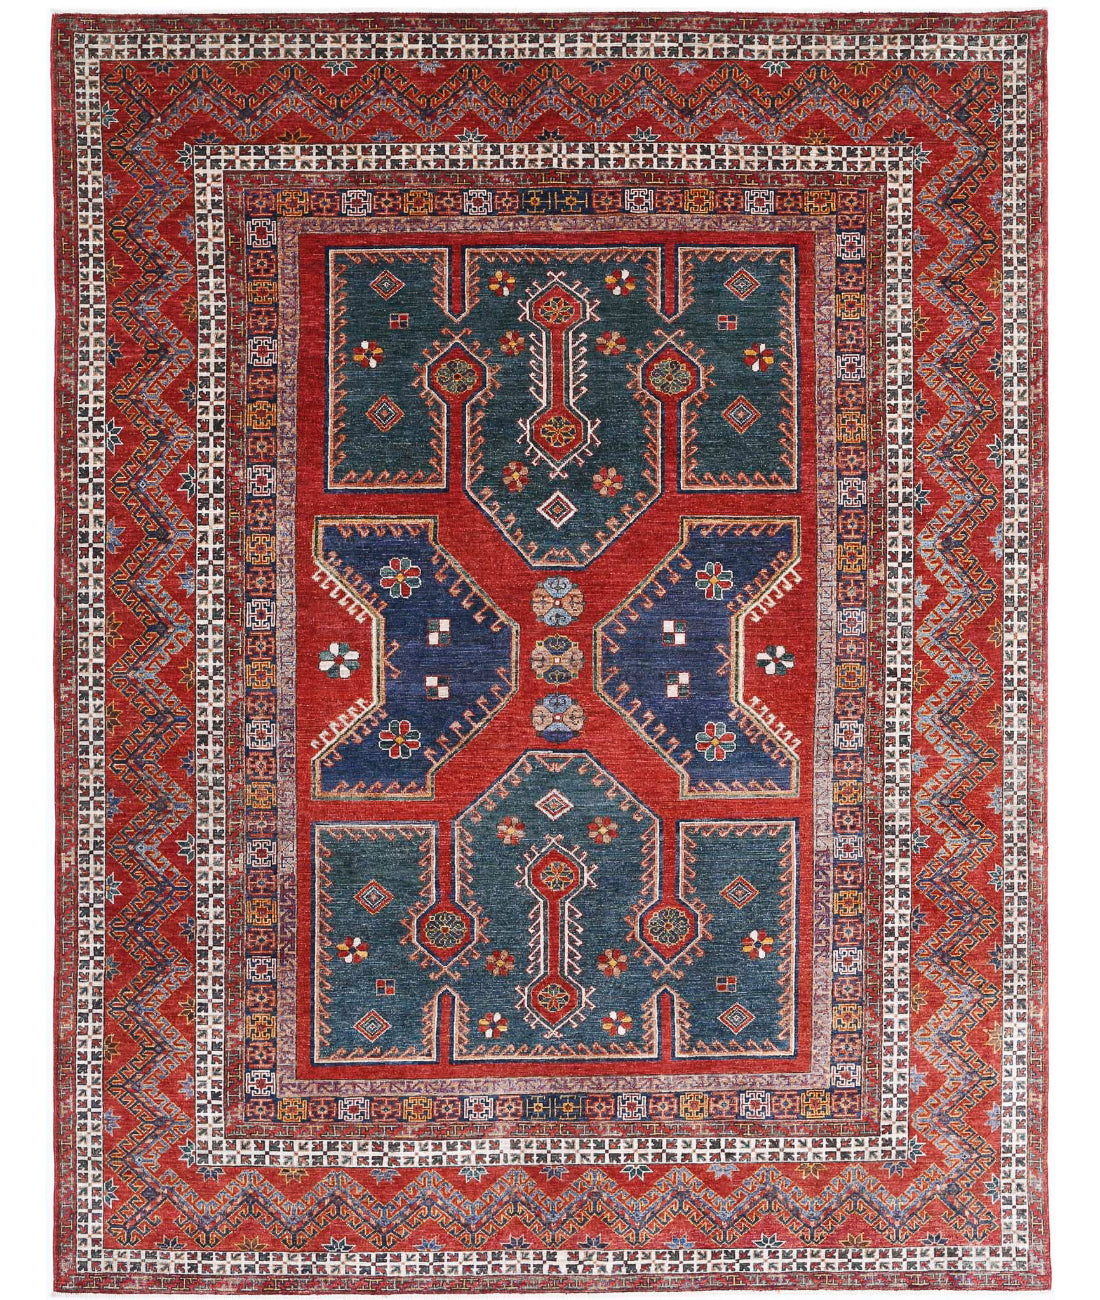 Hand Knotted Nomadic Caucasian Humna Wool Rug - 8'2'' x 10'8'' 8'2'' x 10'8'' (245 X 320) / Green / Rust